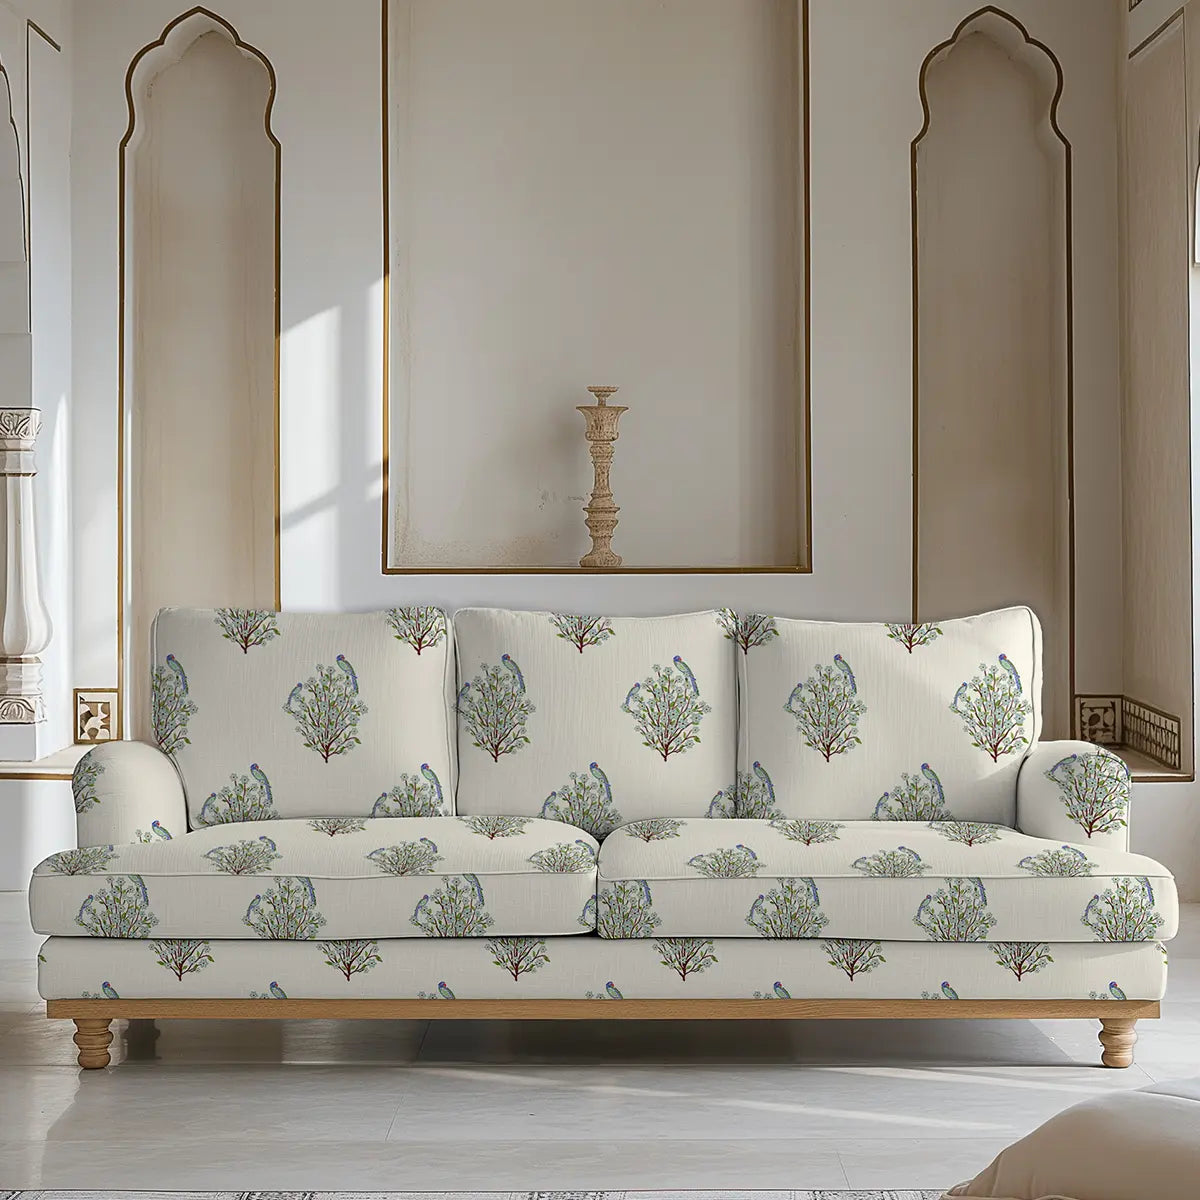 shop now Zardozi Floral Sofa and Chairs Upholstery Fabric in Cream Color Buy Now